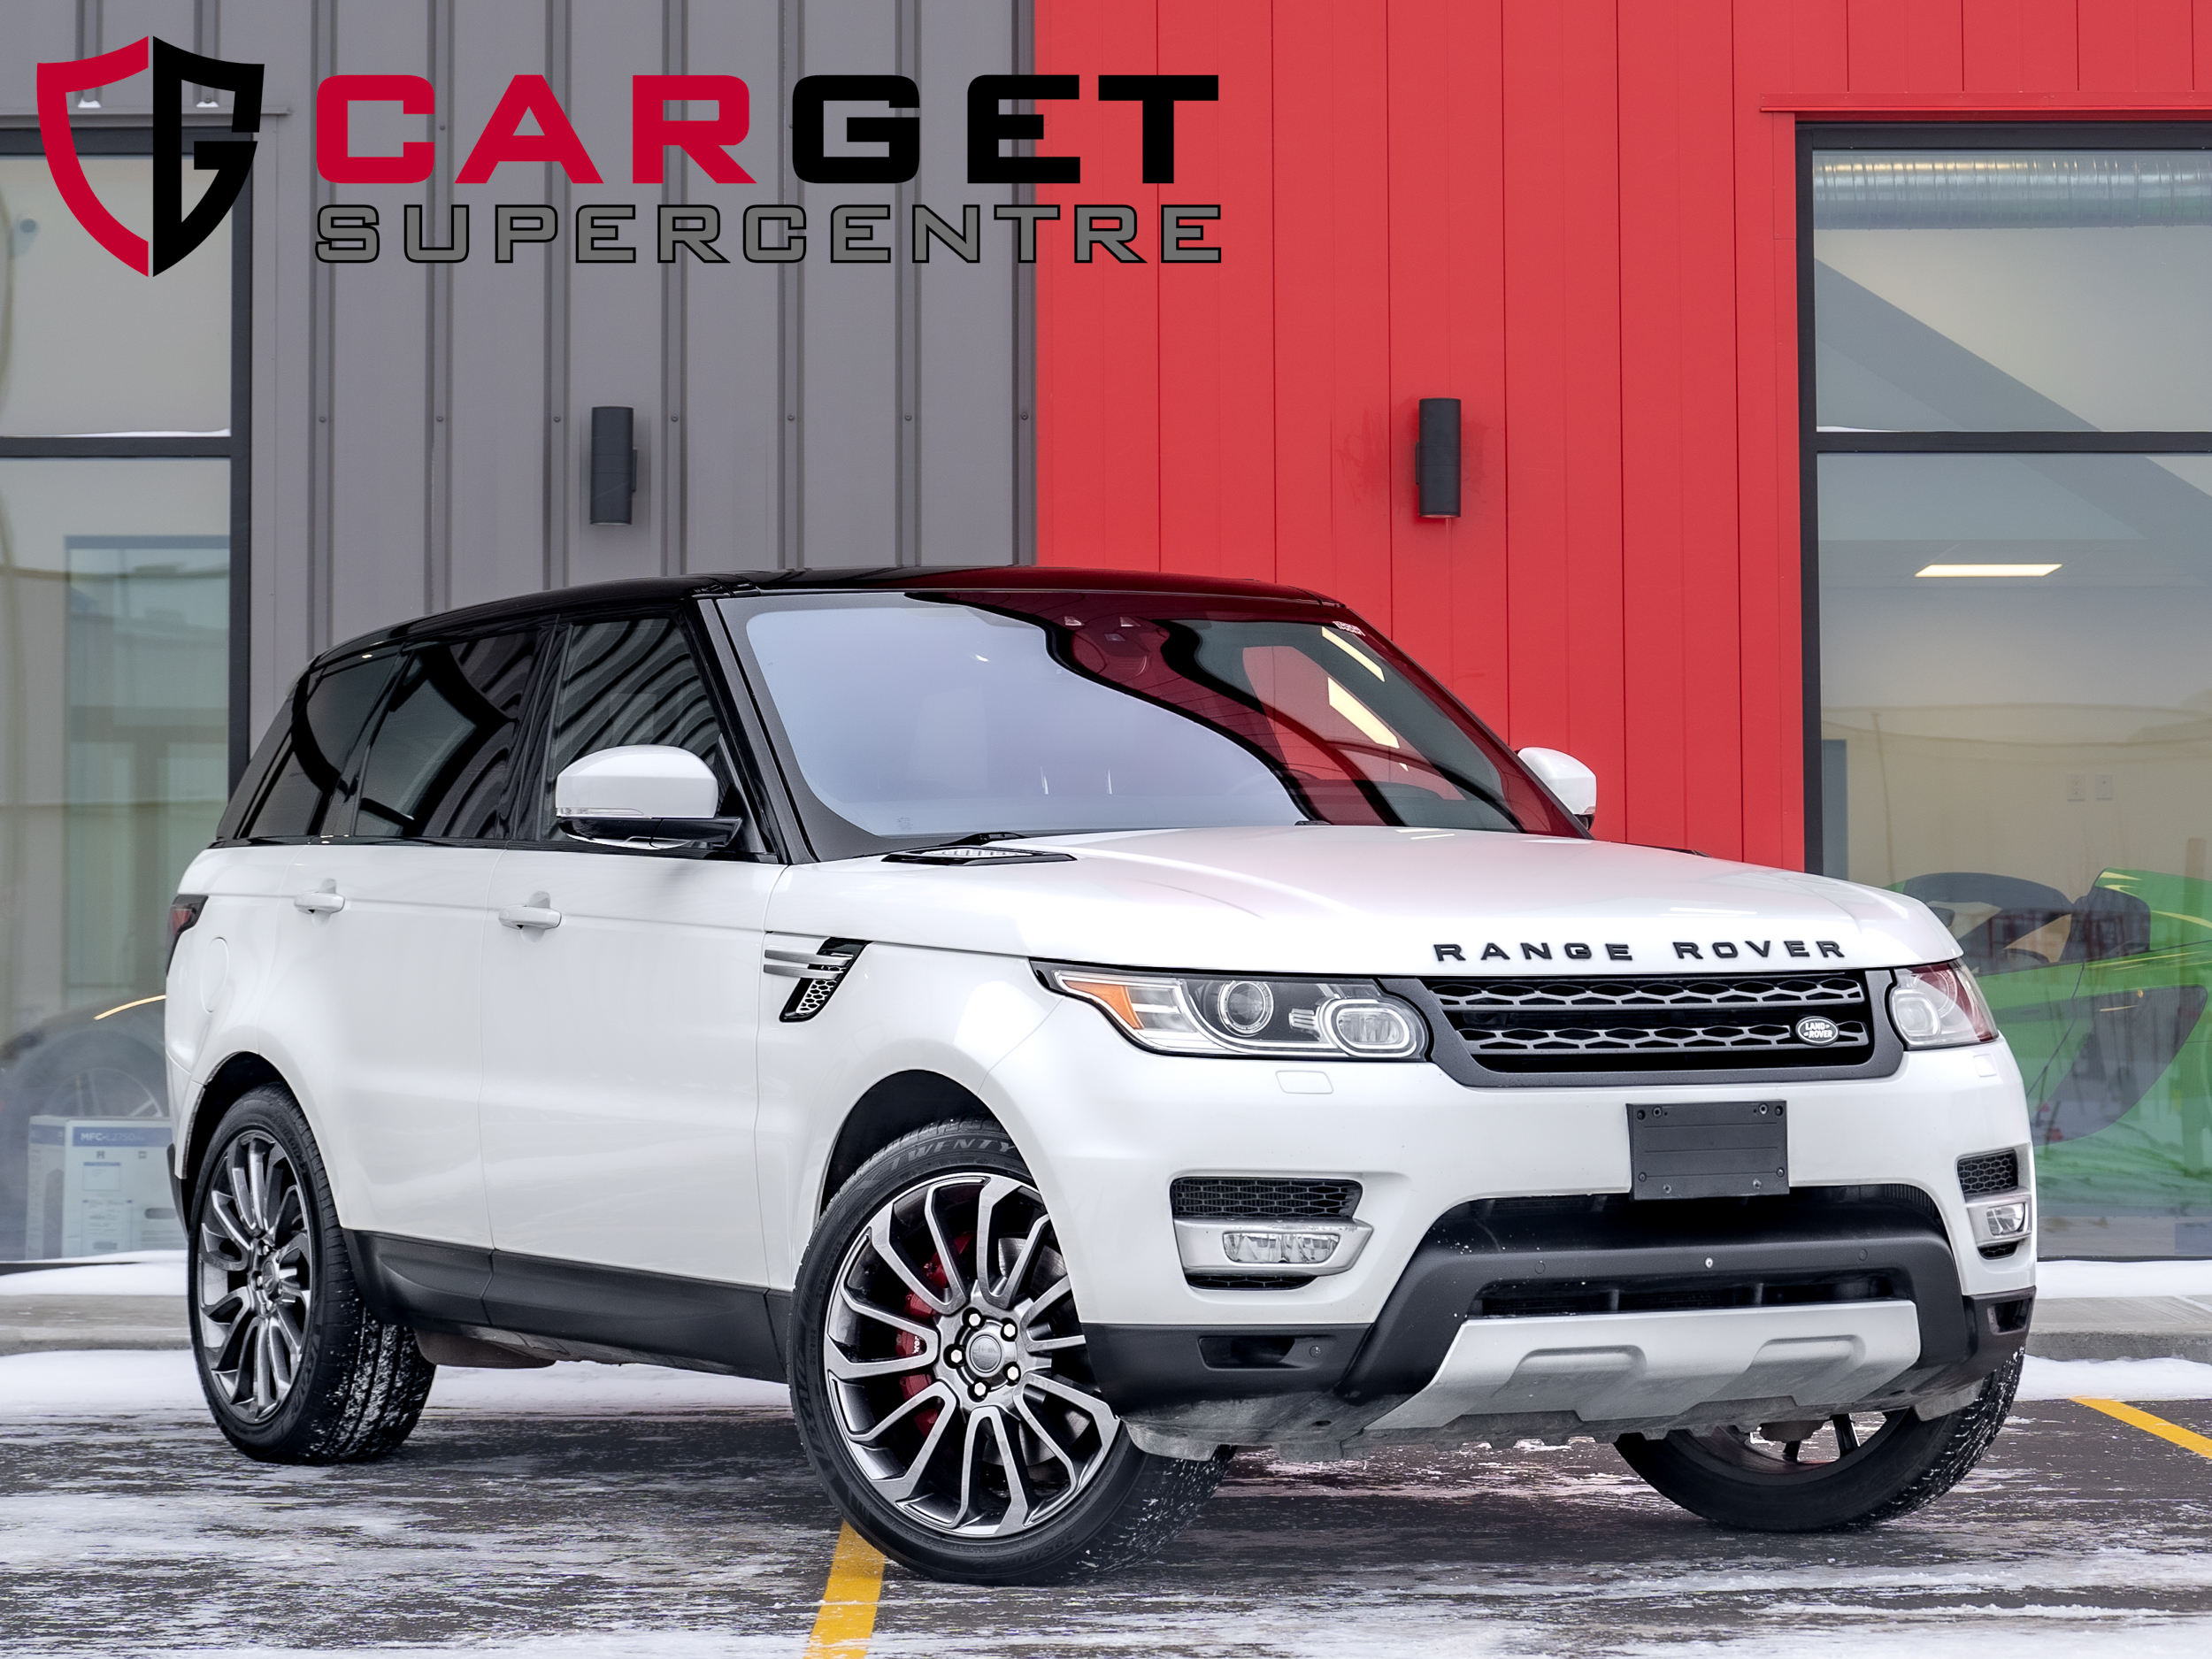 2017 Land Rover Range Rover Sport Supercharged - 510 HP | Pano Roof | 22" Rims